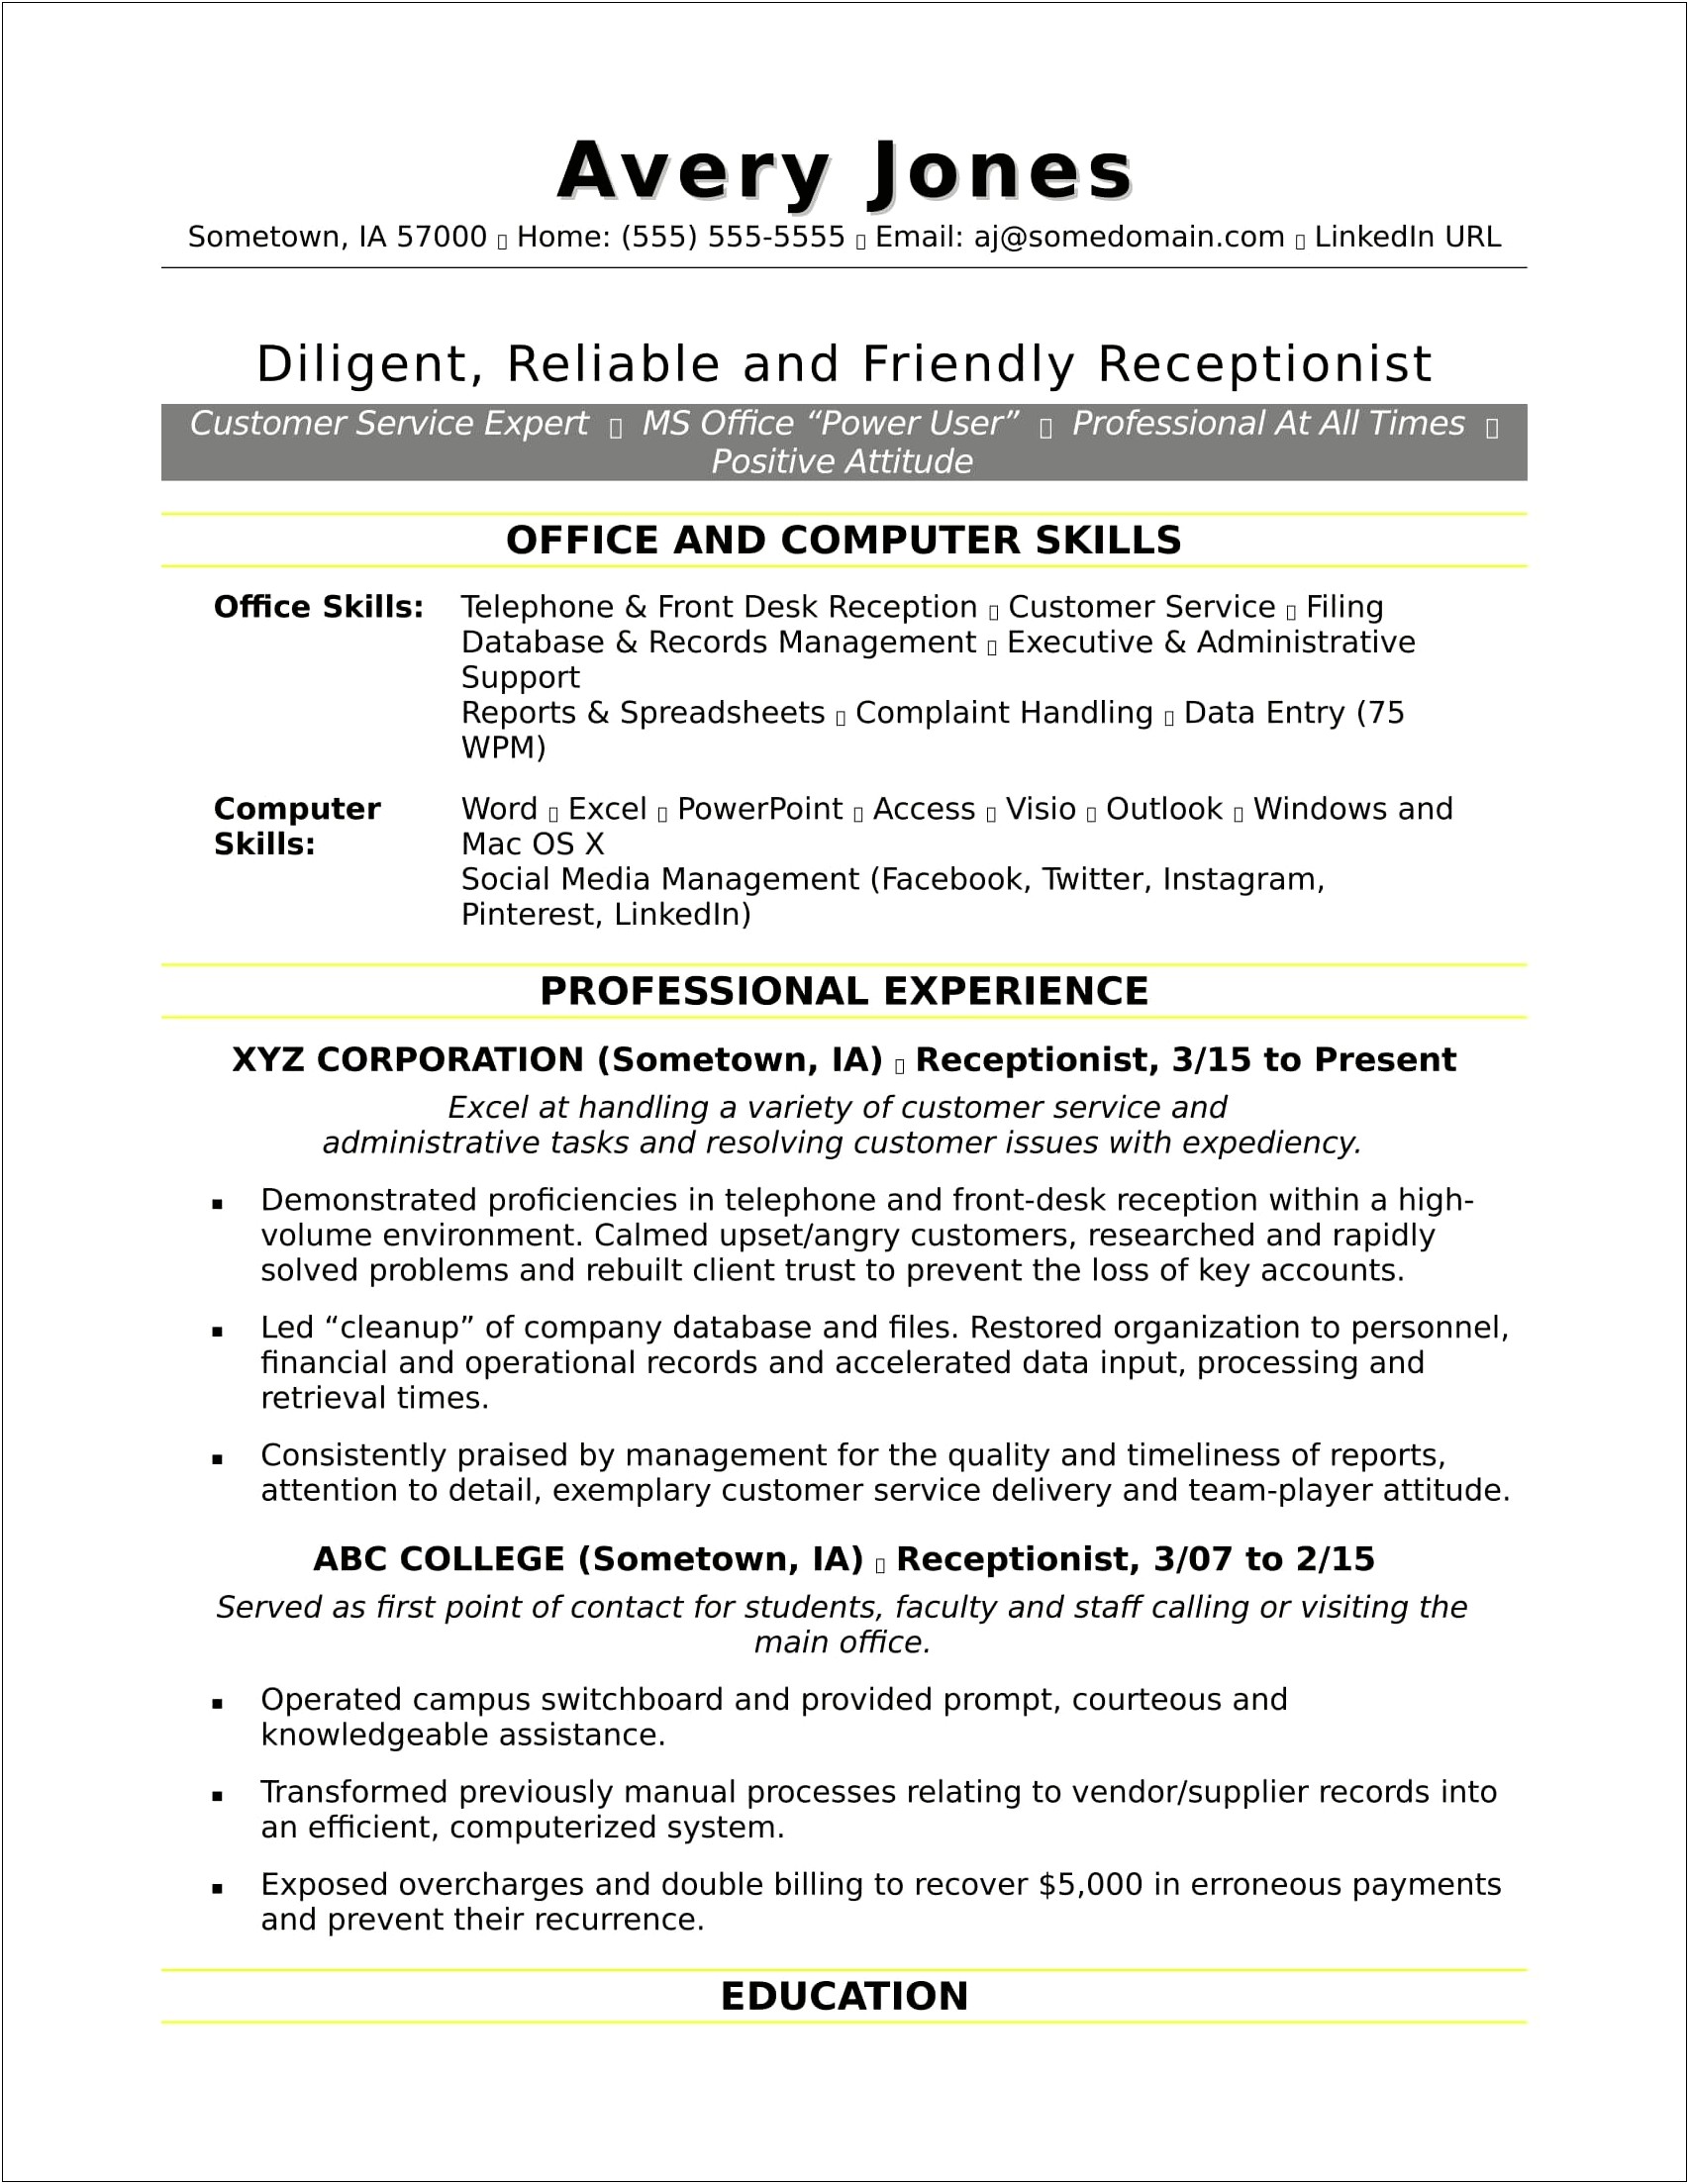 Resume For Receptionist Position With No Experience